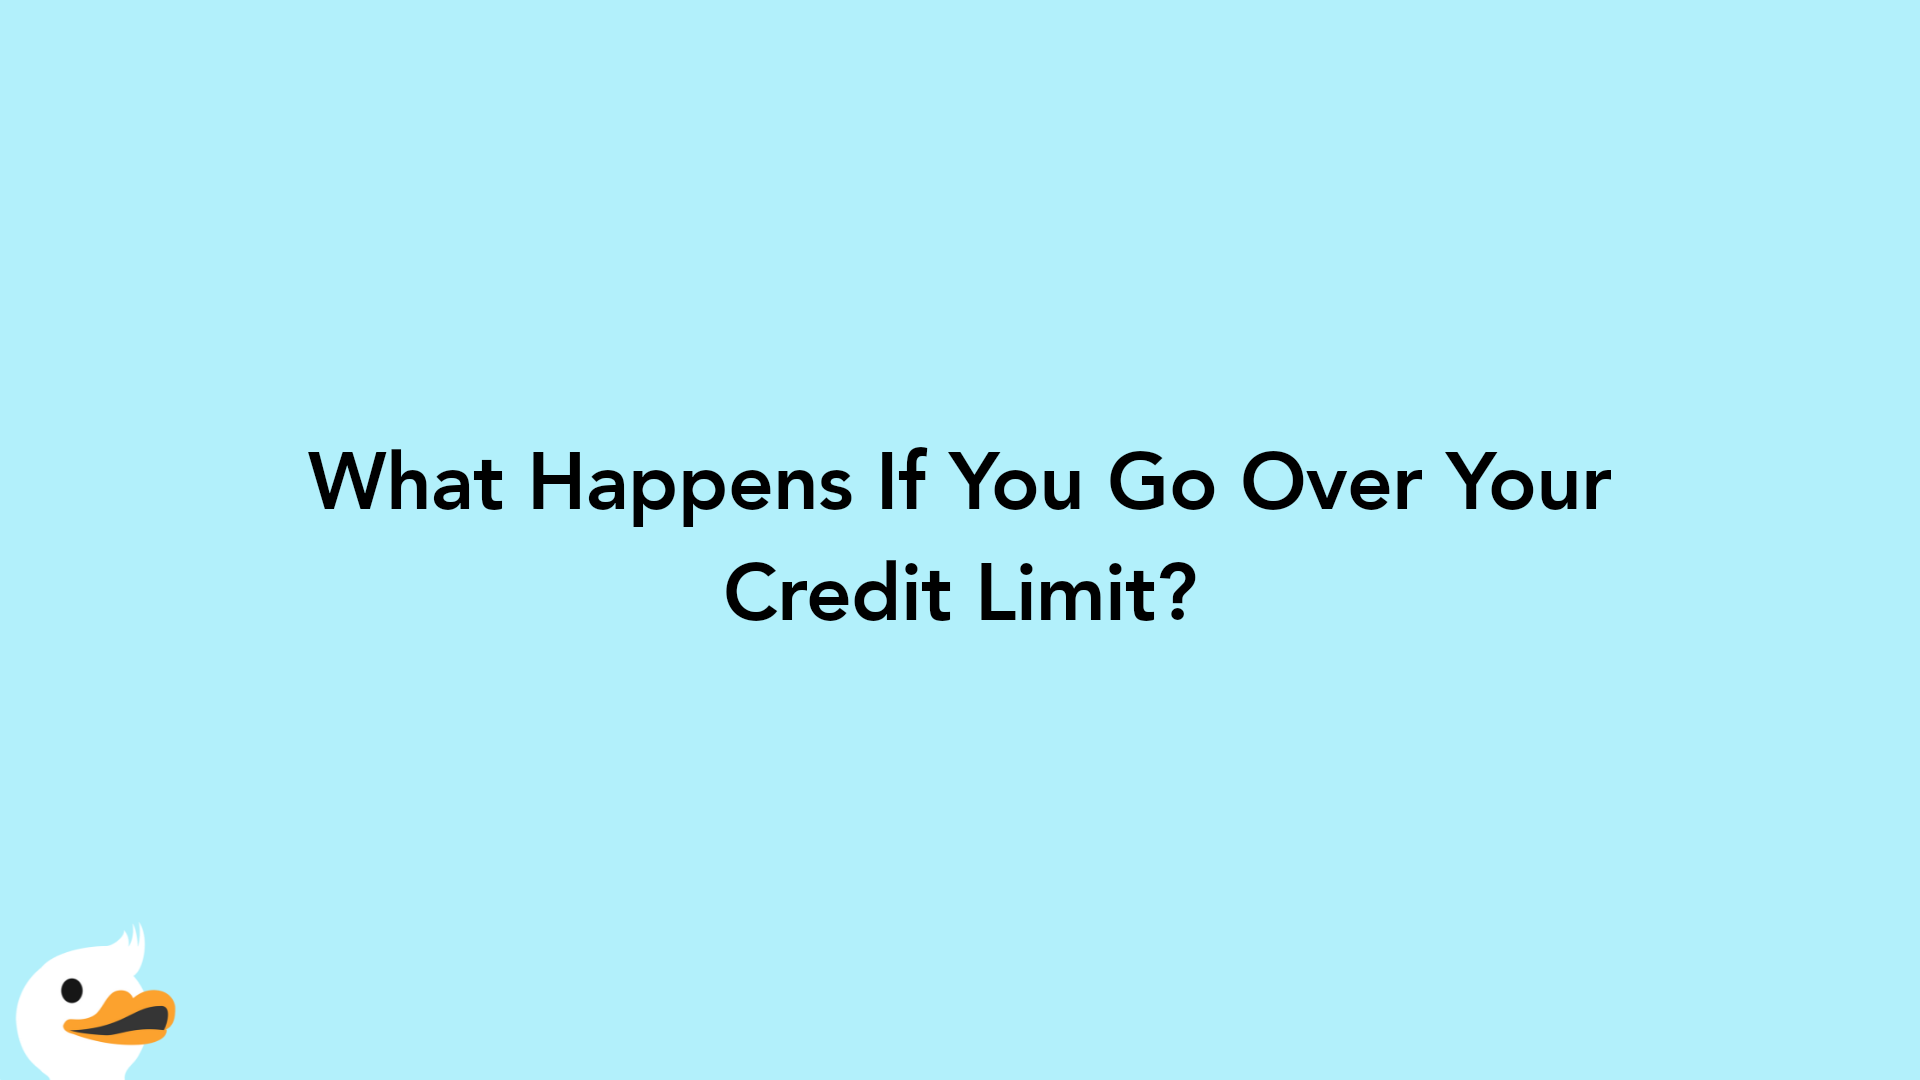 What Happens If You Go Over Your Credit Limit?